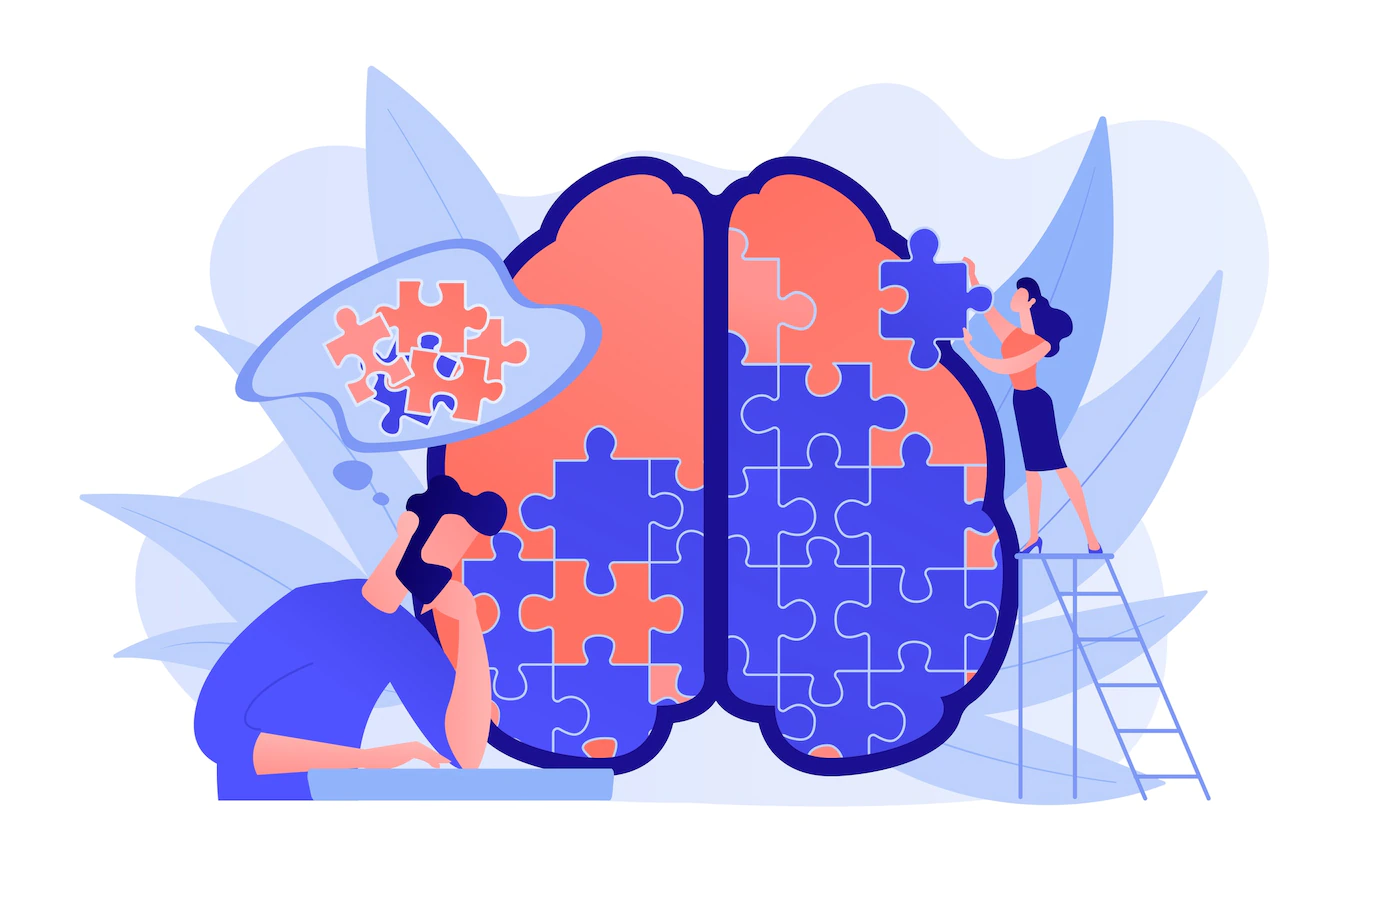 Man Doing Human Brain Puzzle Psychology Psychotherapy Session Mental Healing Wellbeing Therapist Counselling Mental Illness Difficulties Violet Palette Vector Isolated Illustration 335657 2248